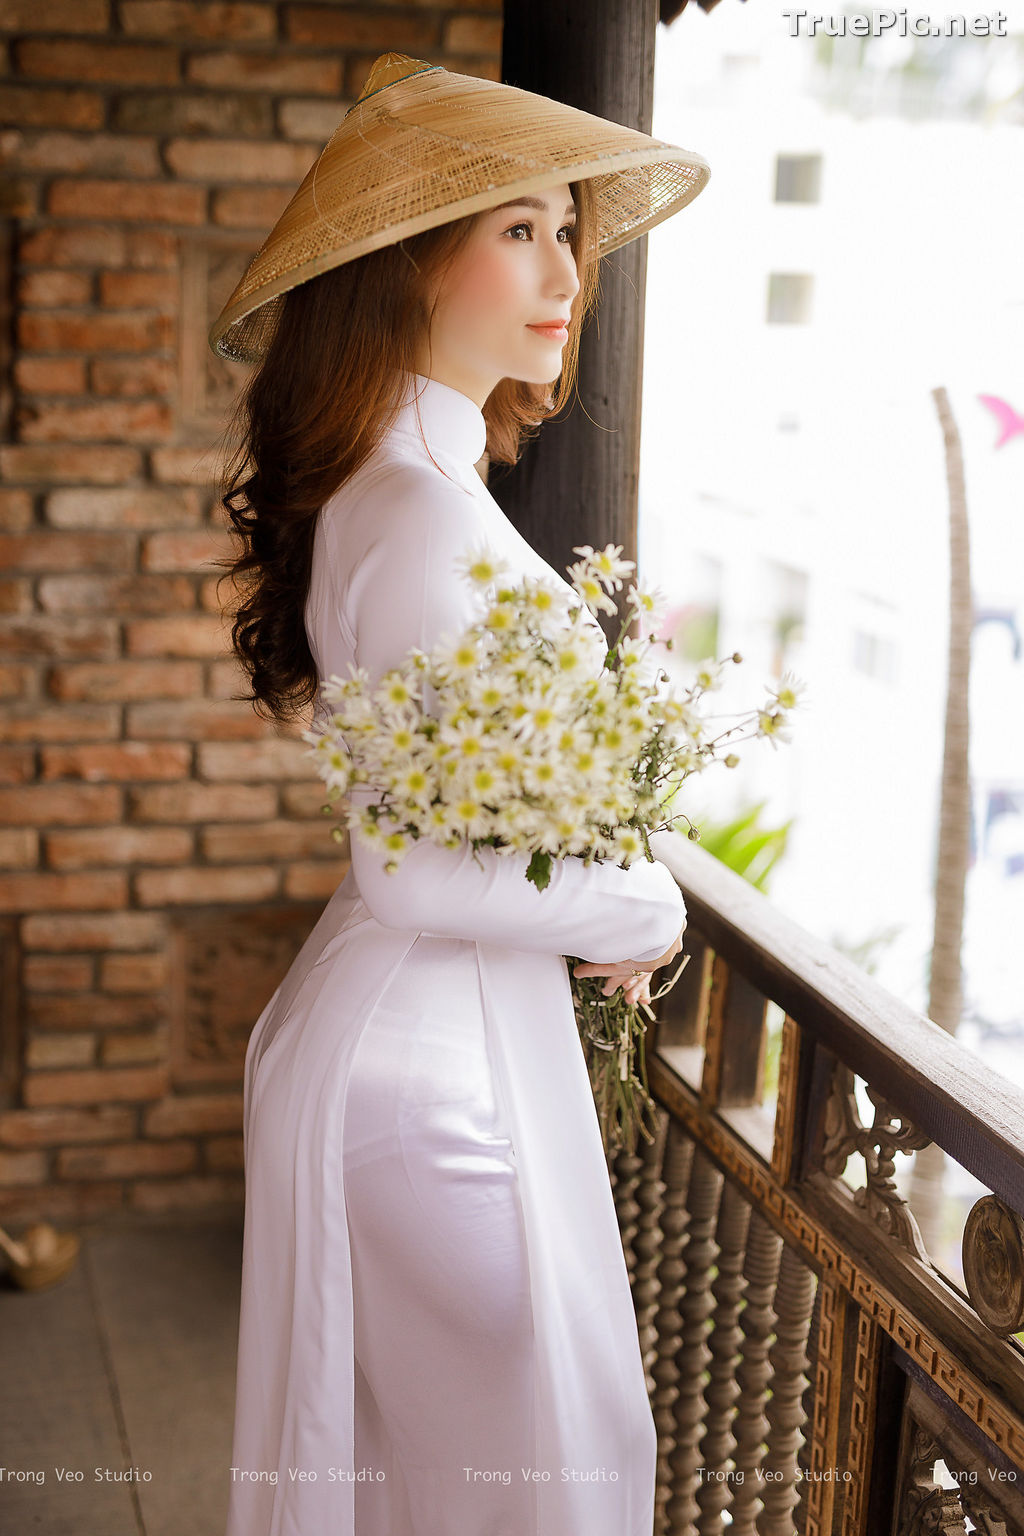 Image The Beauty of Vietnamese Girls with Traditional Dress (Ao Dai) #4 - TruePic.net - Picture-44